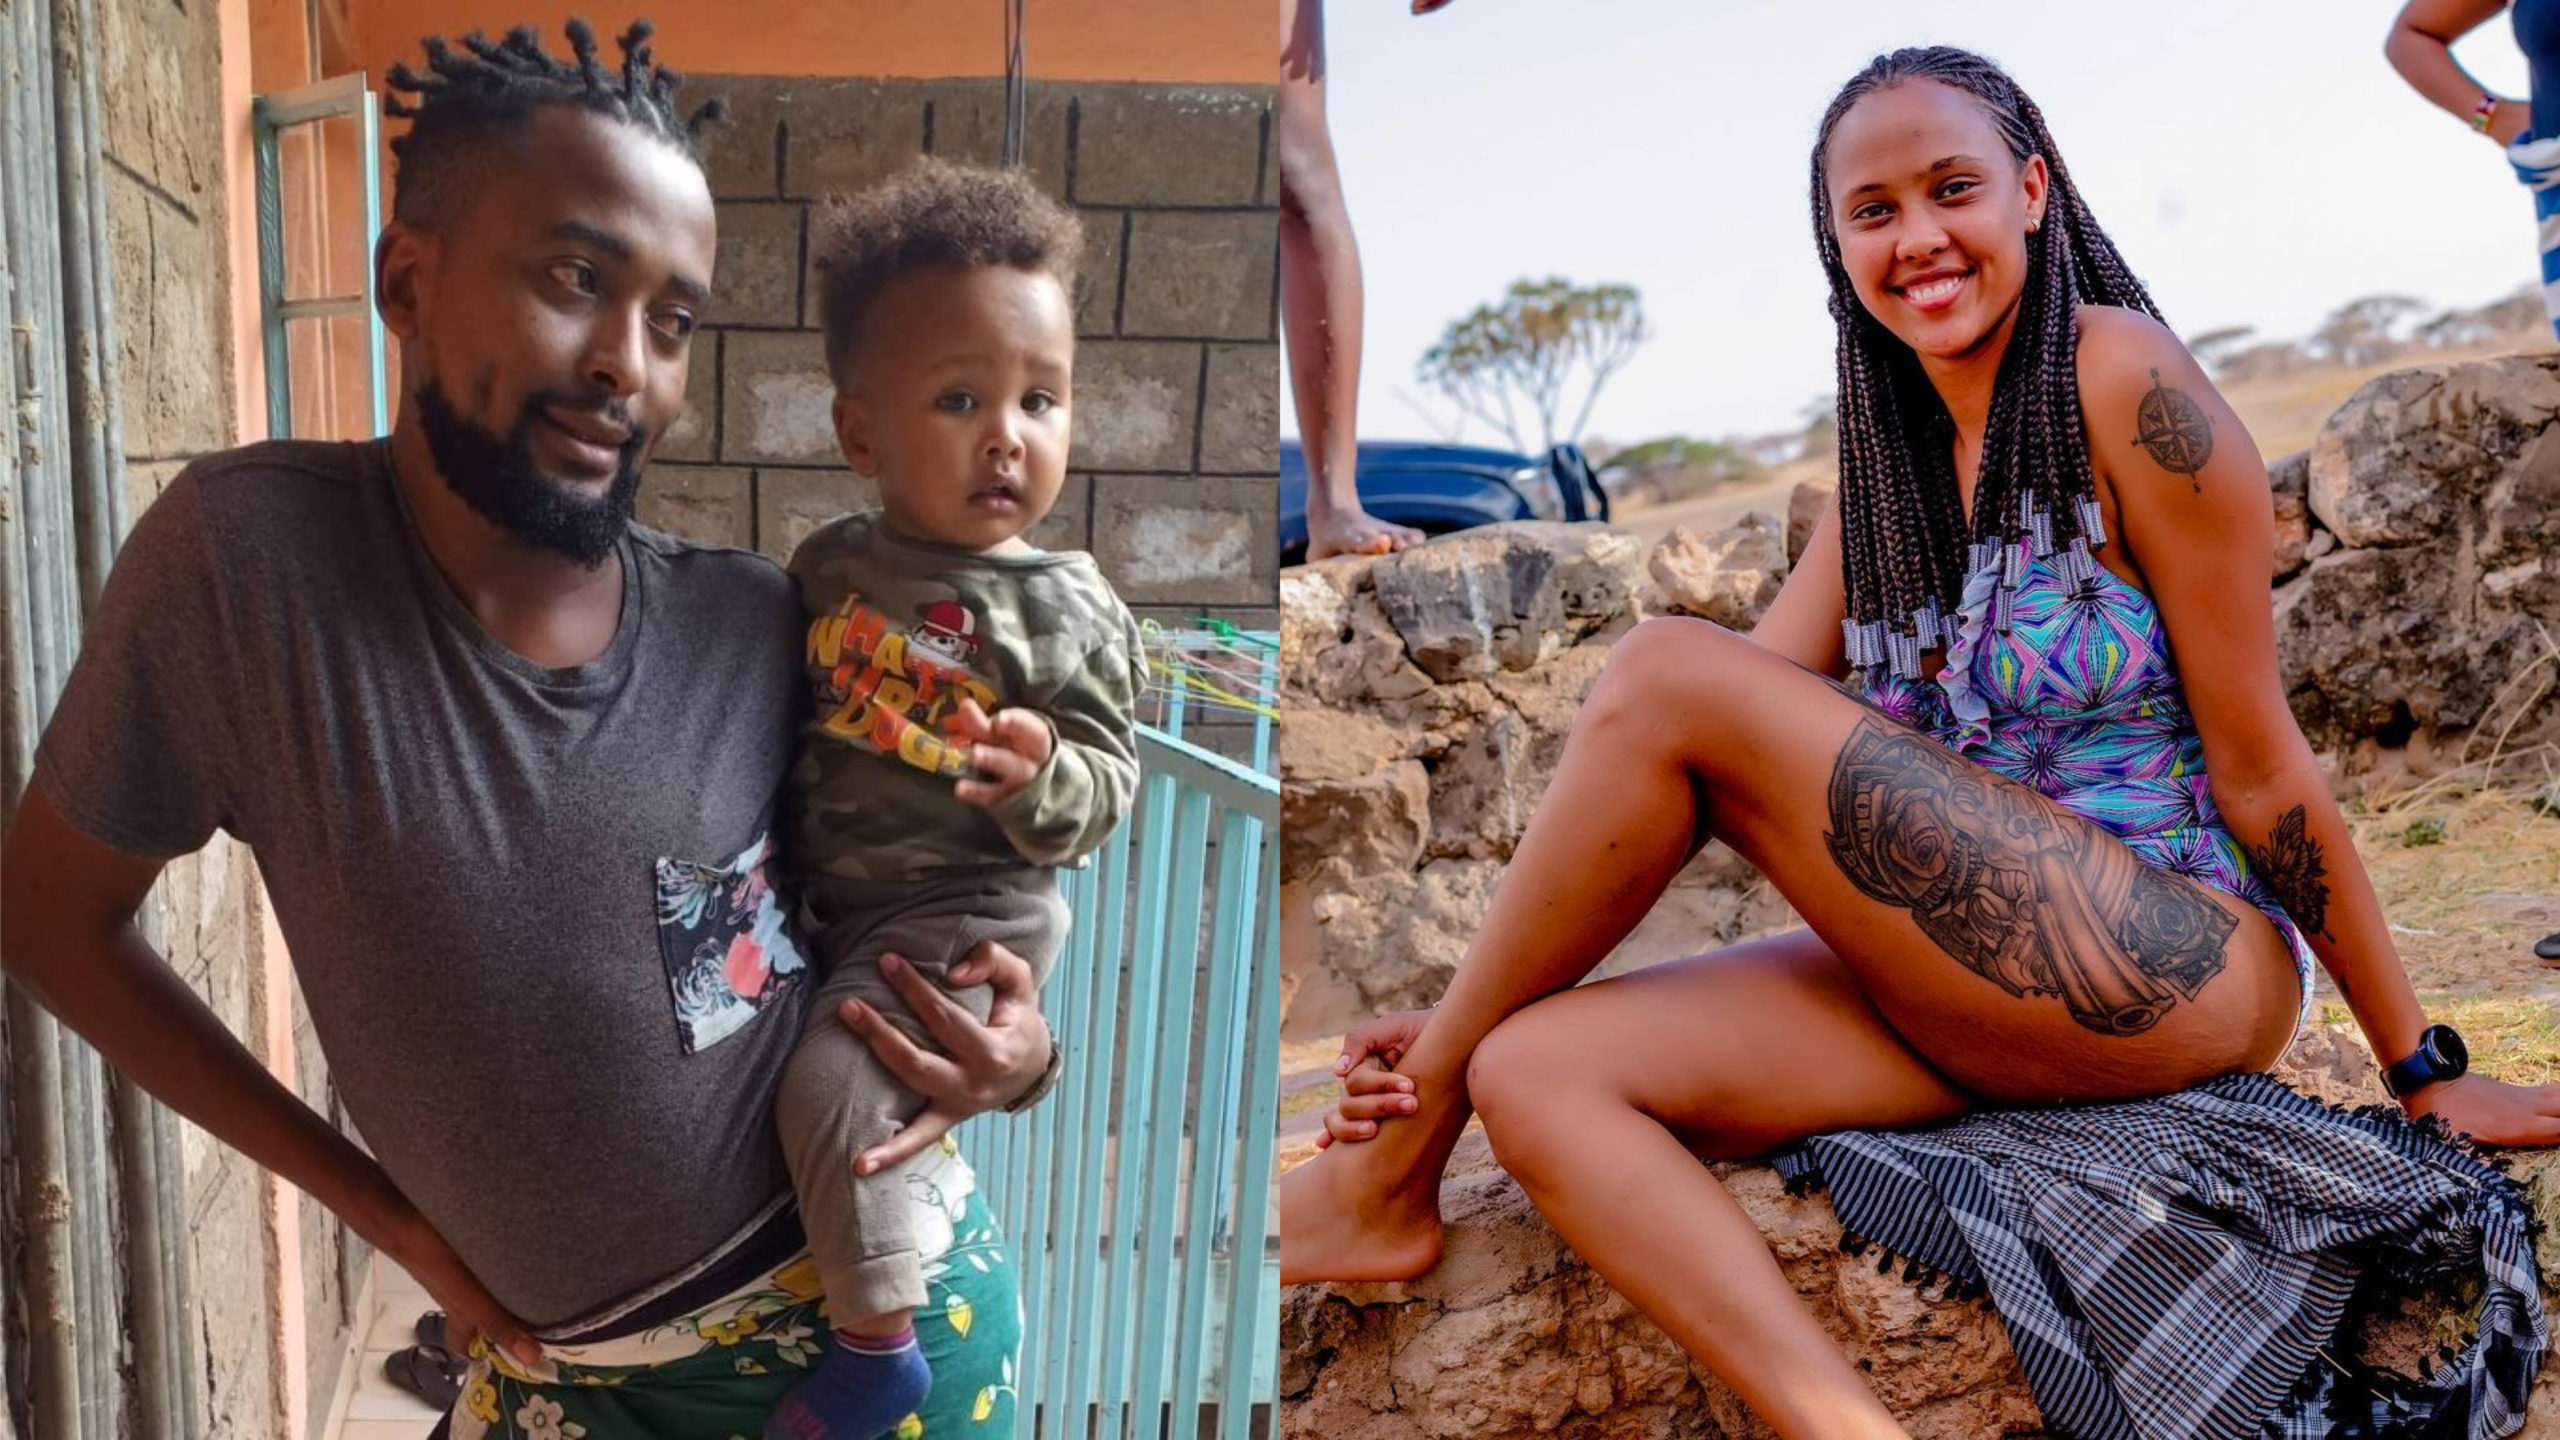 Msungu Mkale explains why she walked out on 2 year old son leaving him with ex boyfriend, Shaniqwa